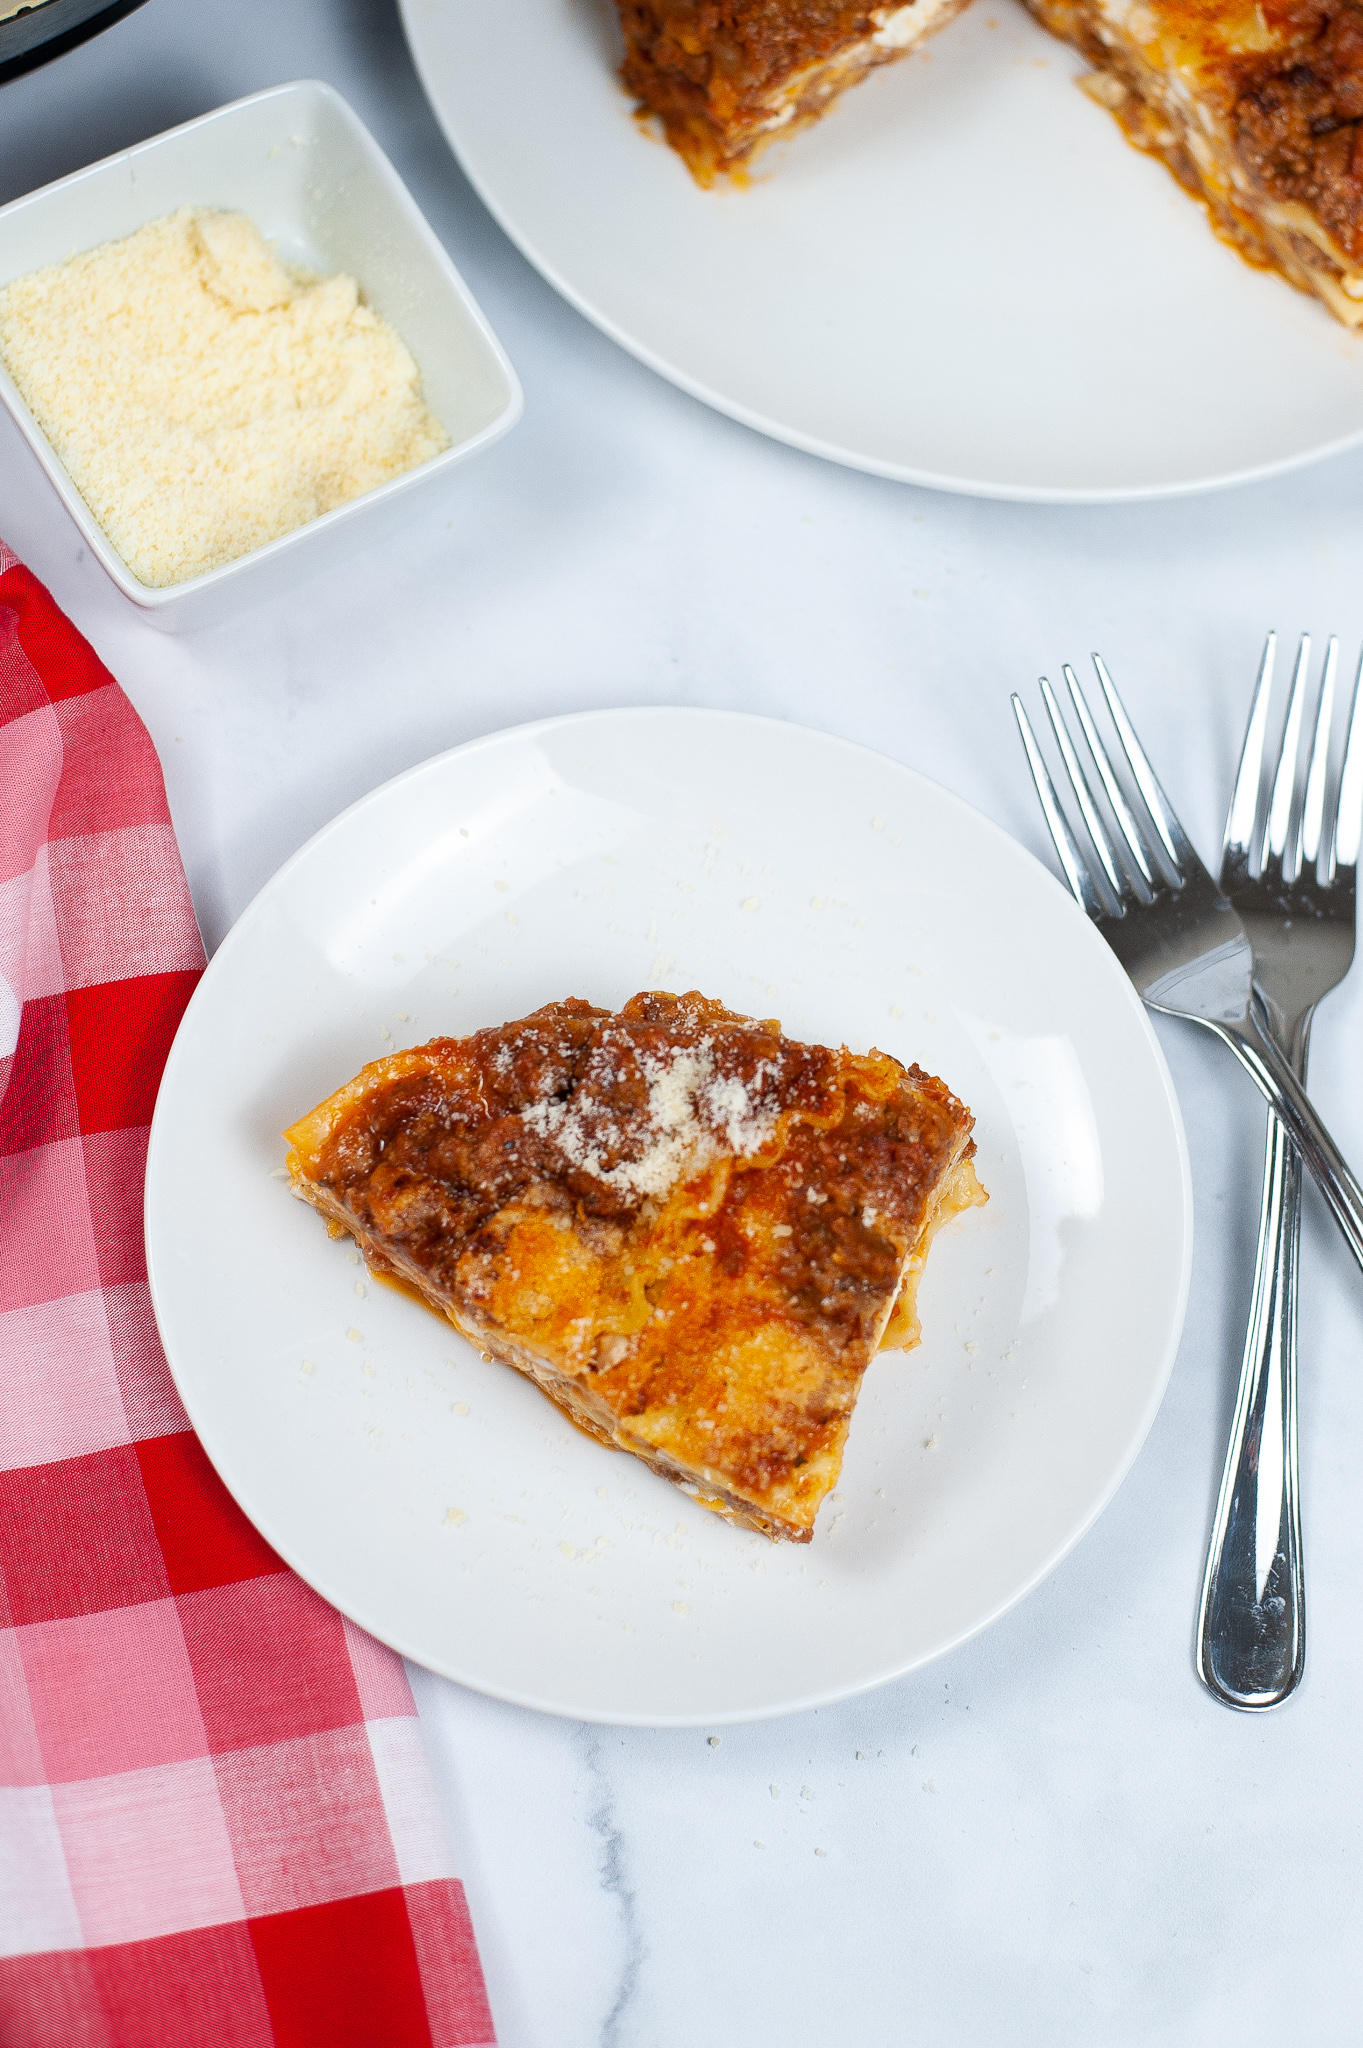 Slice of Instant Pot Lasagna on a round white dish with a fork and check napkin.